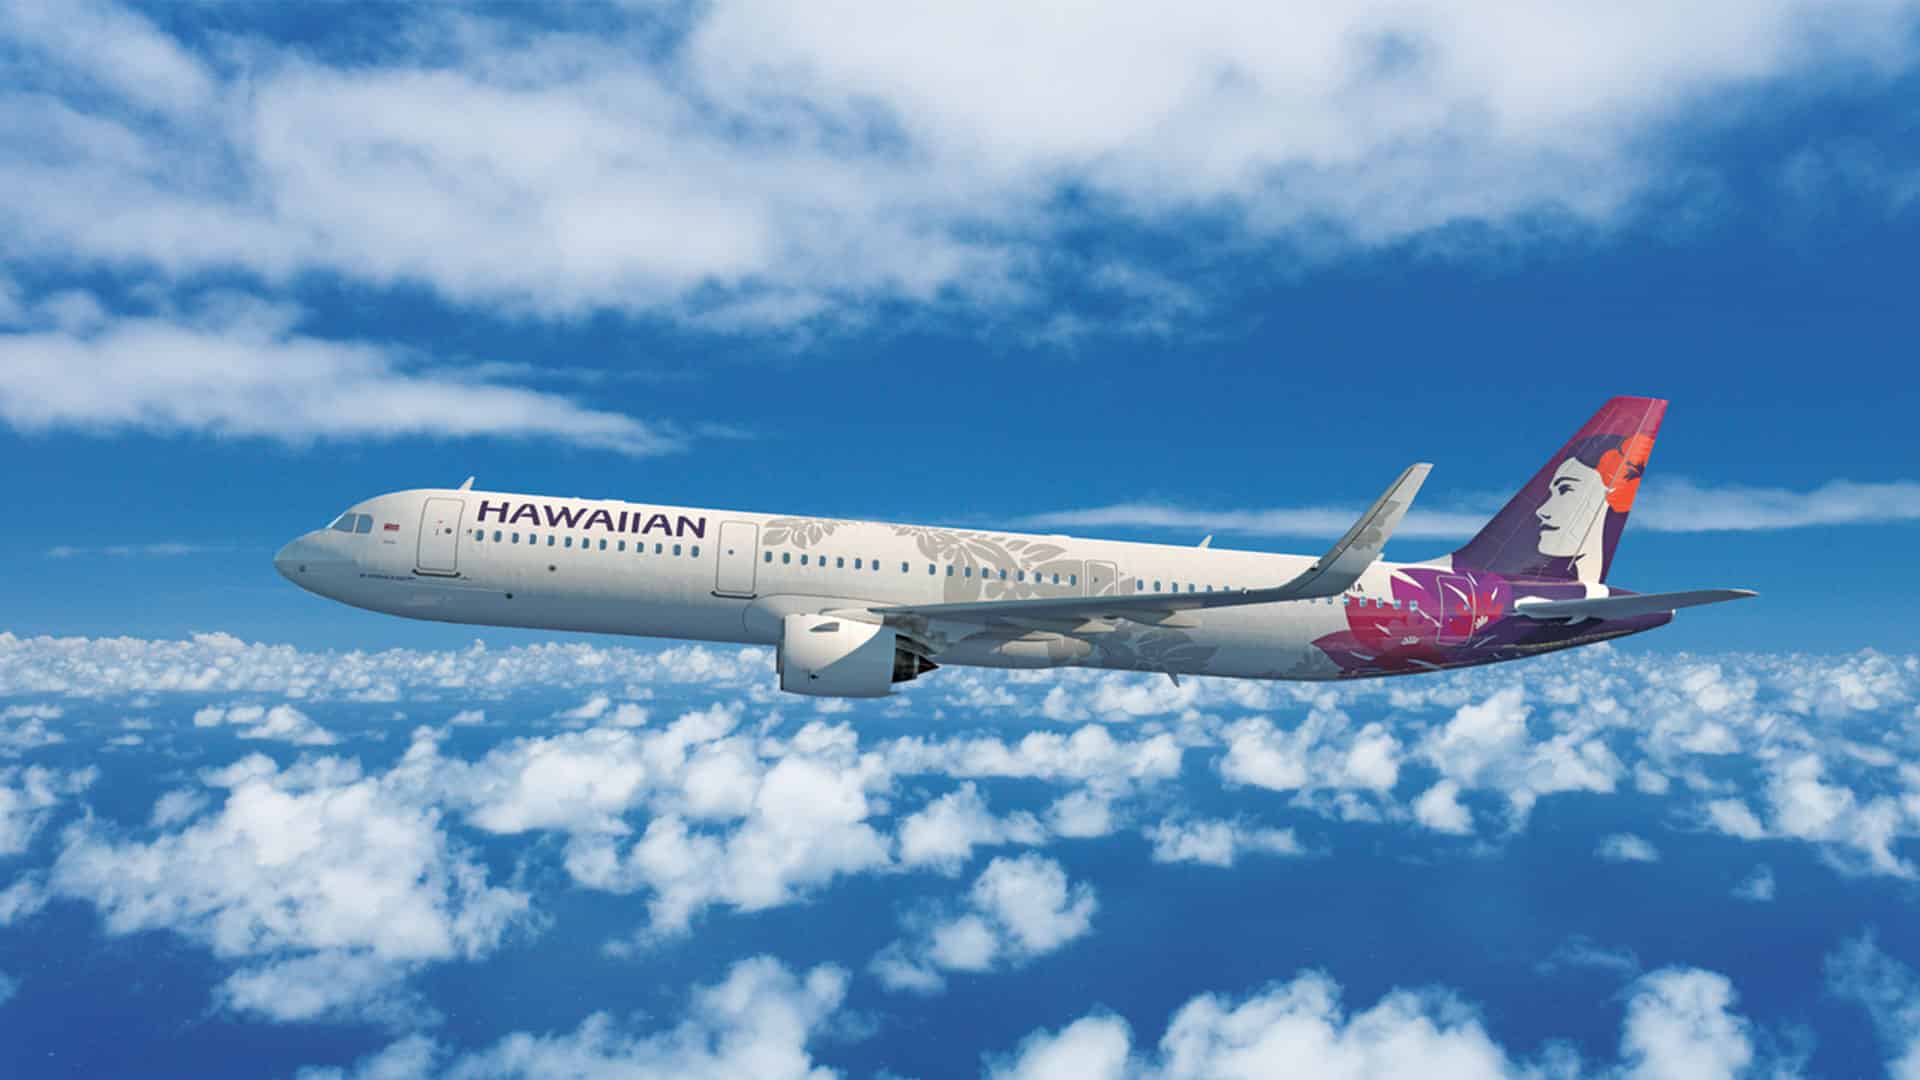 Hawaiian Airlines in the air